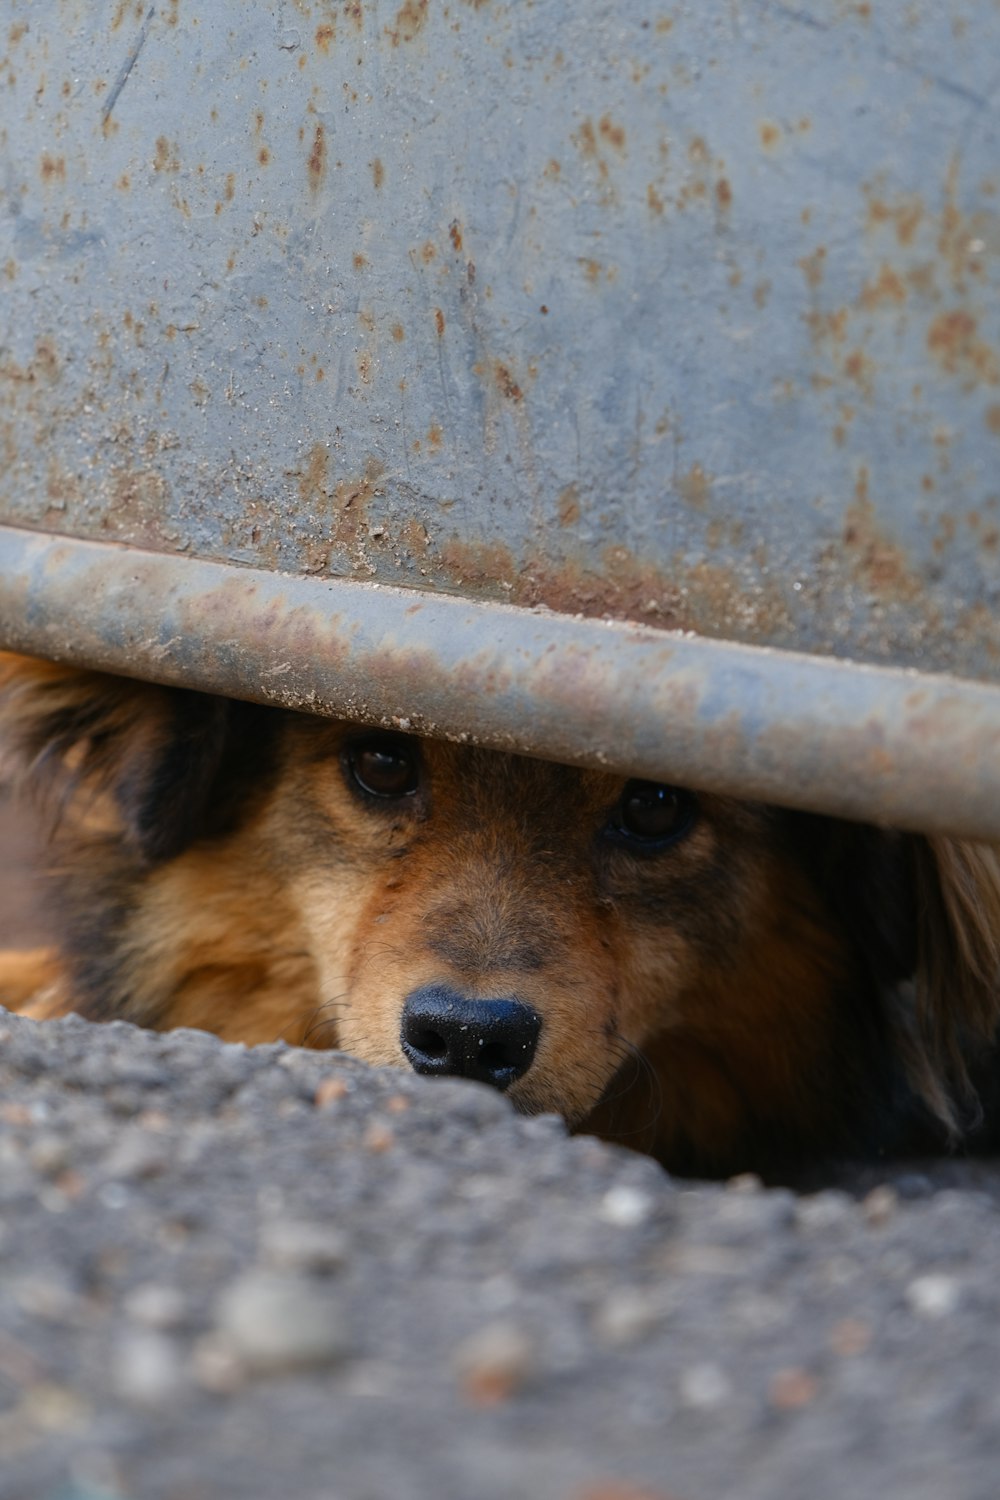 a dog is hiding under a metal object